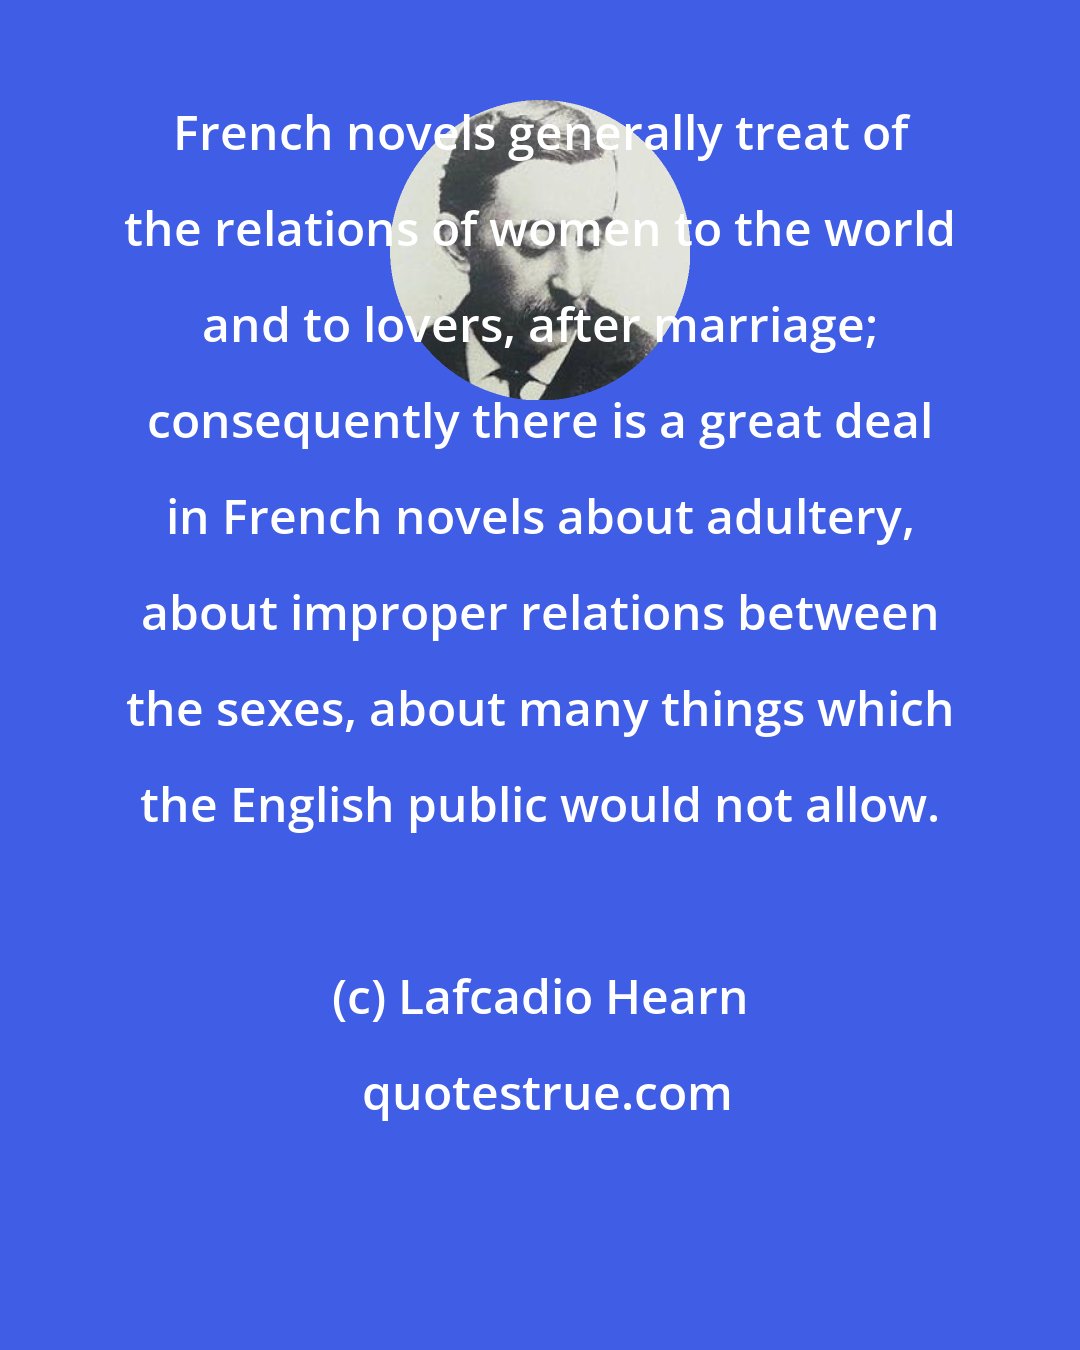 Lafcadio Hearn: French novels generally treat of the relations of women to the world and to lovers, after marriage; consequently there is a great deal in French novels about adultery, about improper relations between the sexes, about many things which the English public would not allow.